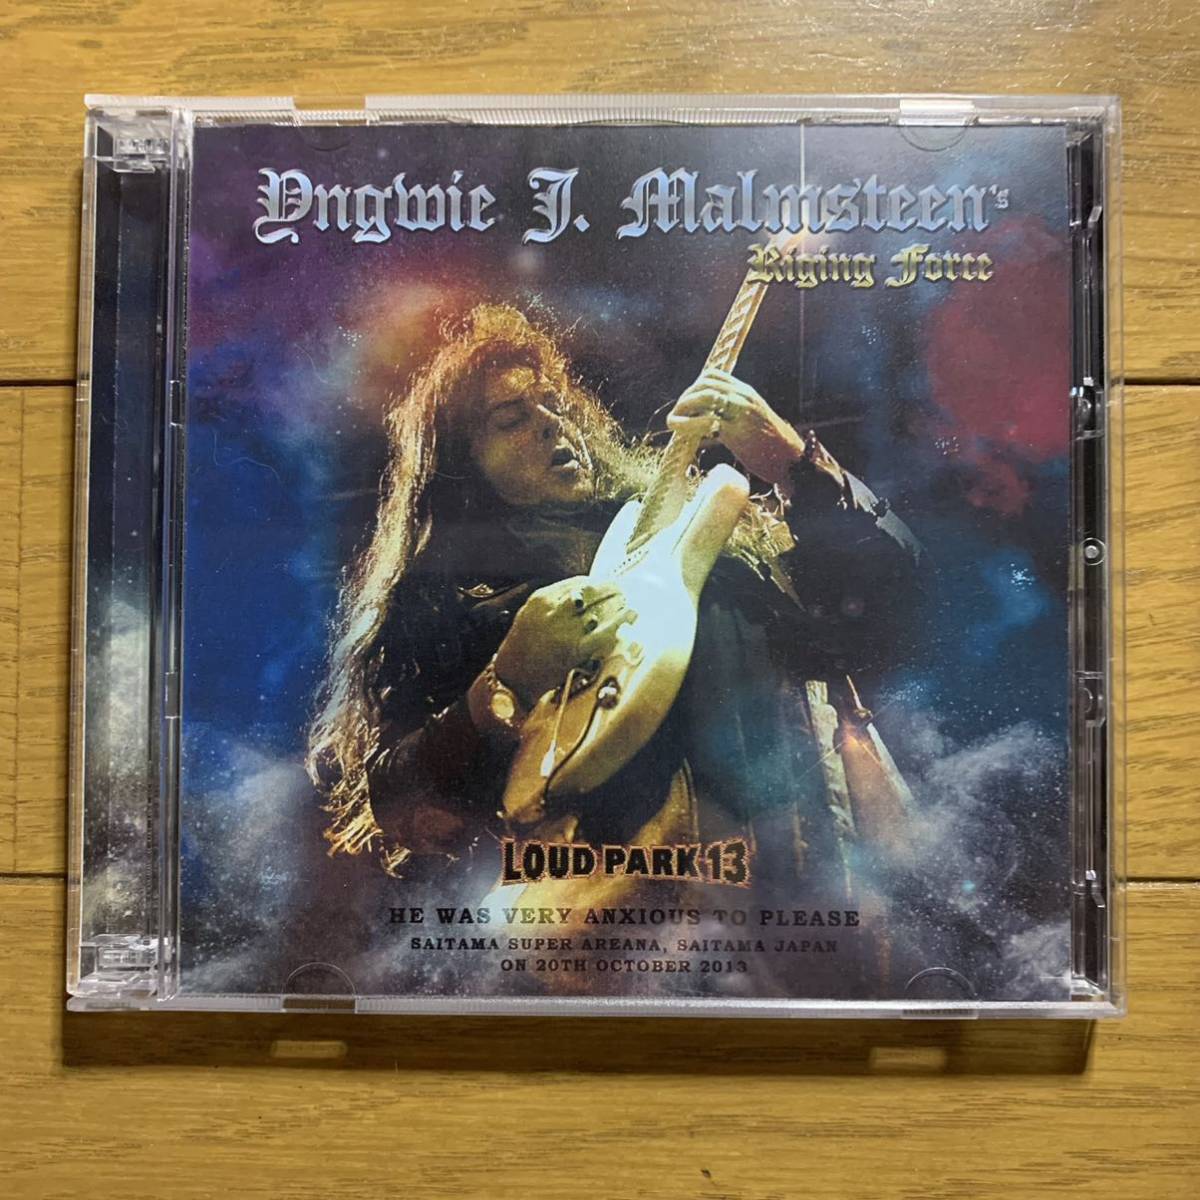 YNGWIE J MALMSTEEN’S RIGING FORCE / HE WAS VERY ANXIOUS TO PLEASE / LP13_画像1